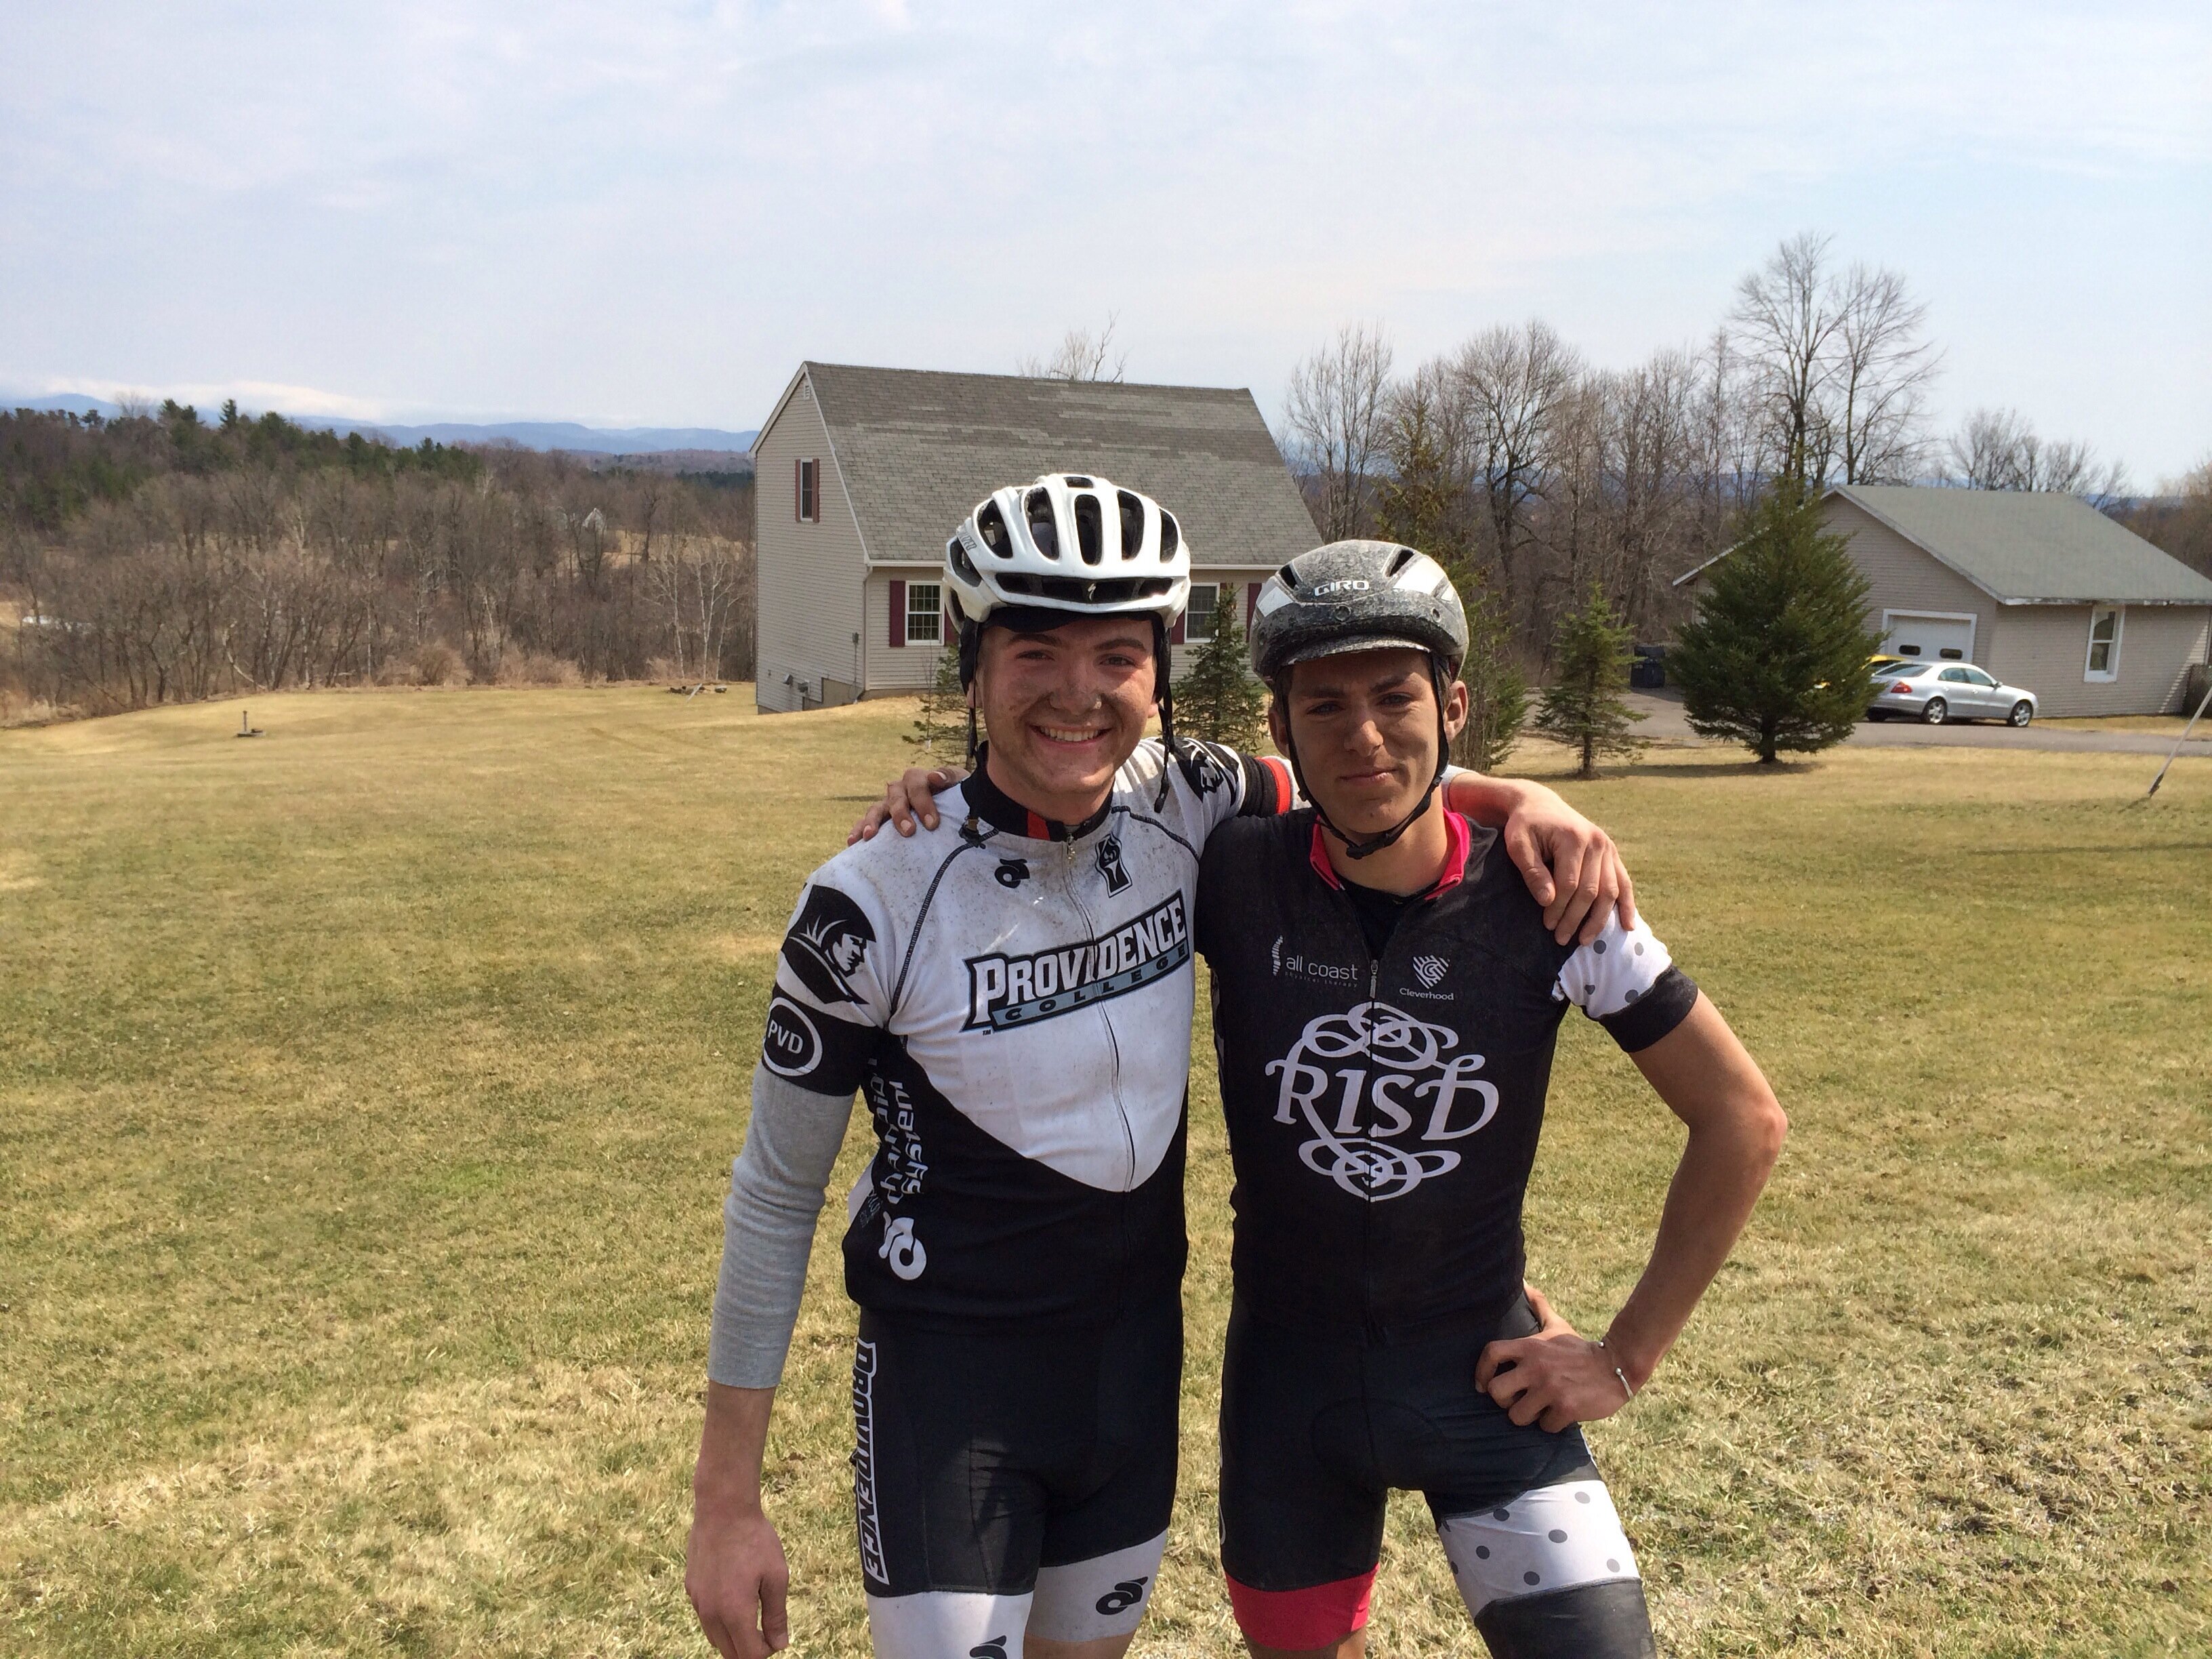 Thomas Barnett of Providence (left) and Jules Goguely of Rhode Island School of Design posing together Sunday. Both had victories in races, and are hosting the ECCC Championships on 4/26-27/14